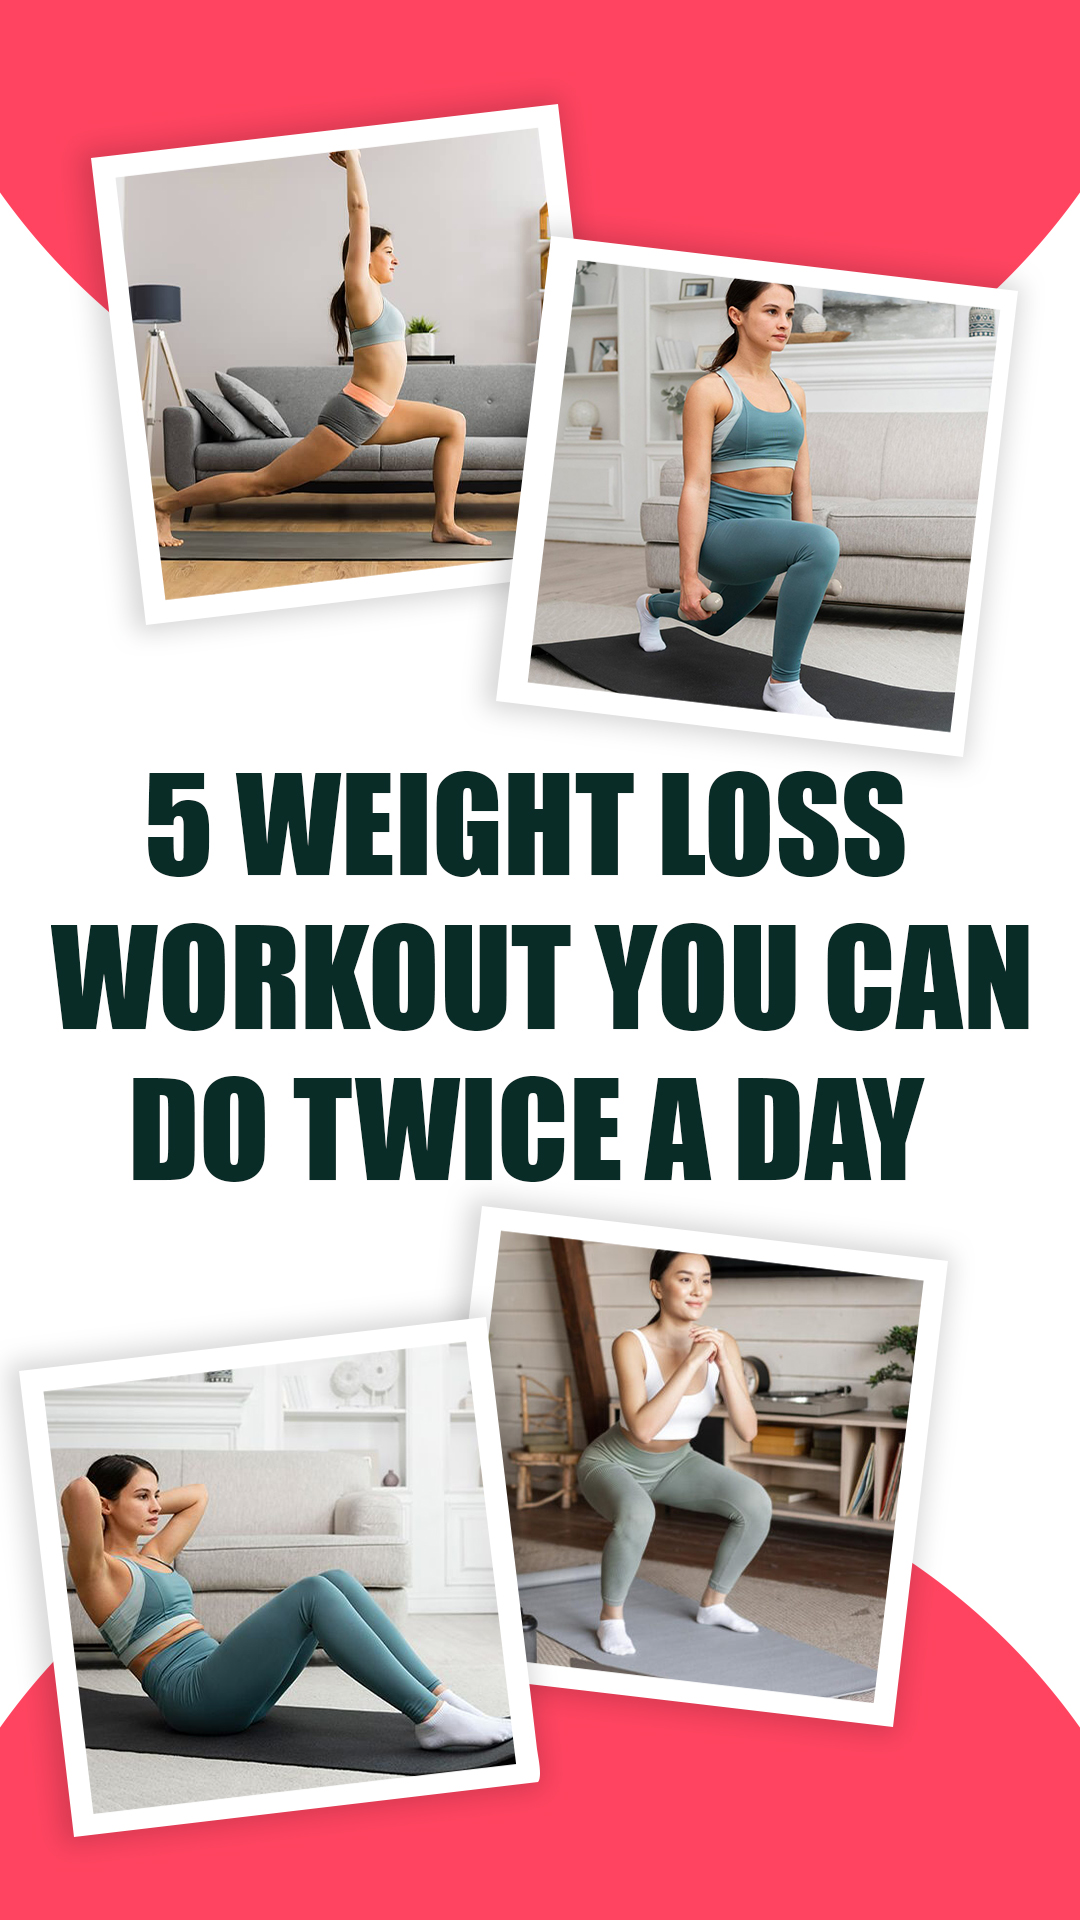 5 Exercises You Can Do Twice a Day for Weight Loss